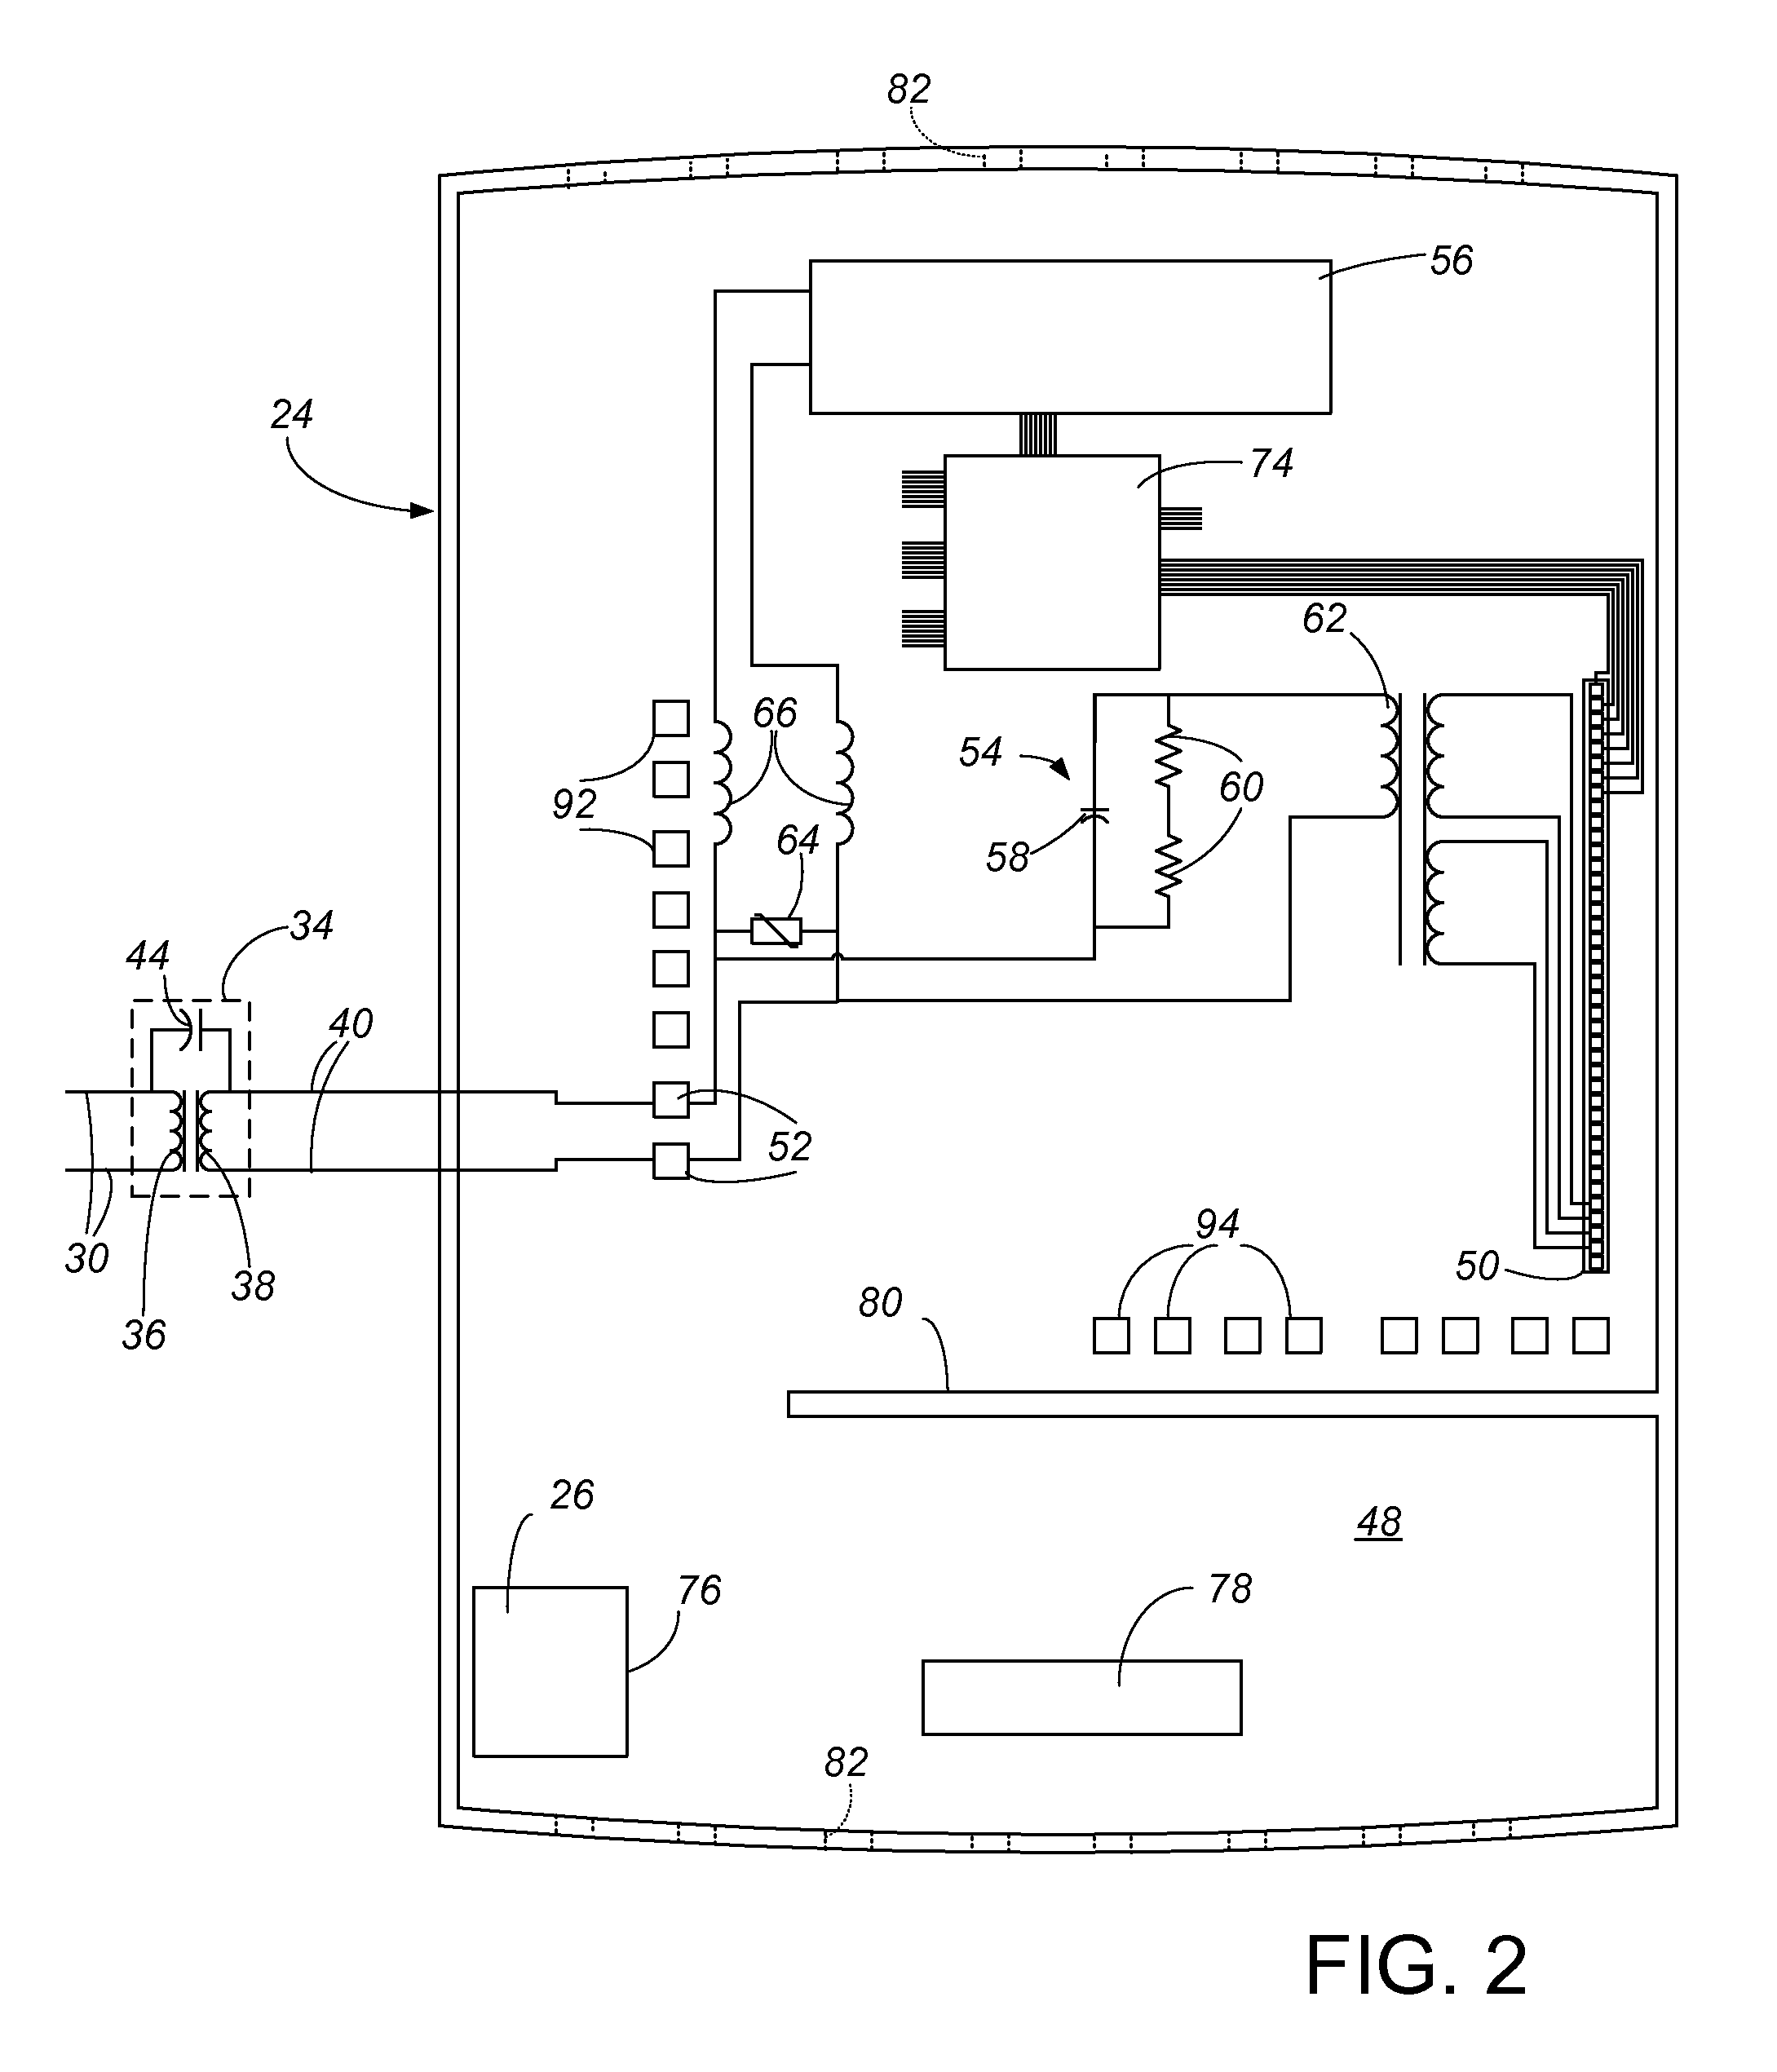 Programmable Communicating Thermostat And System